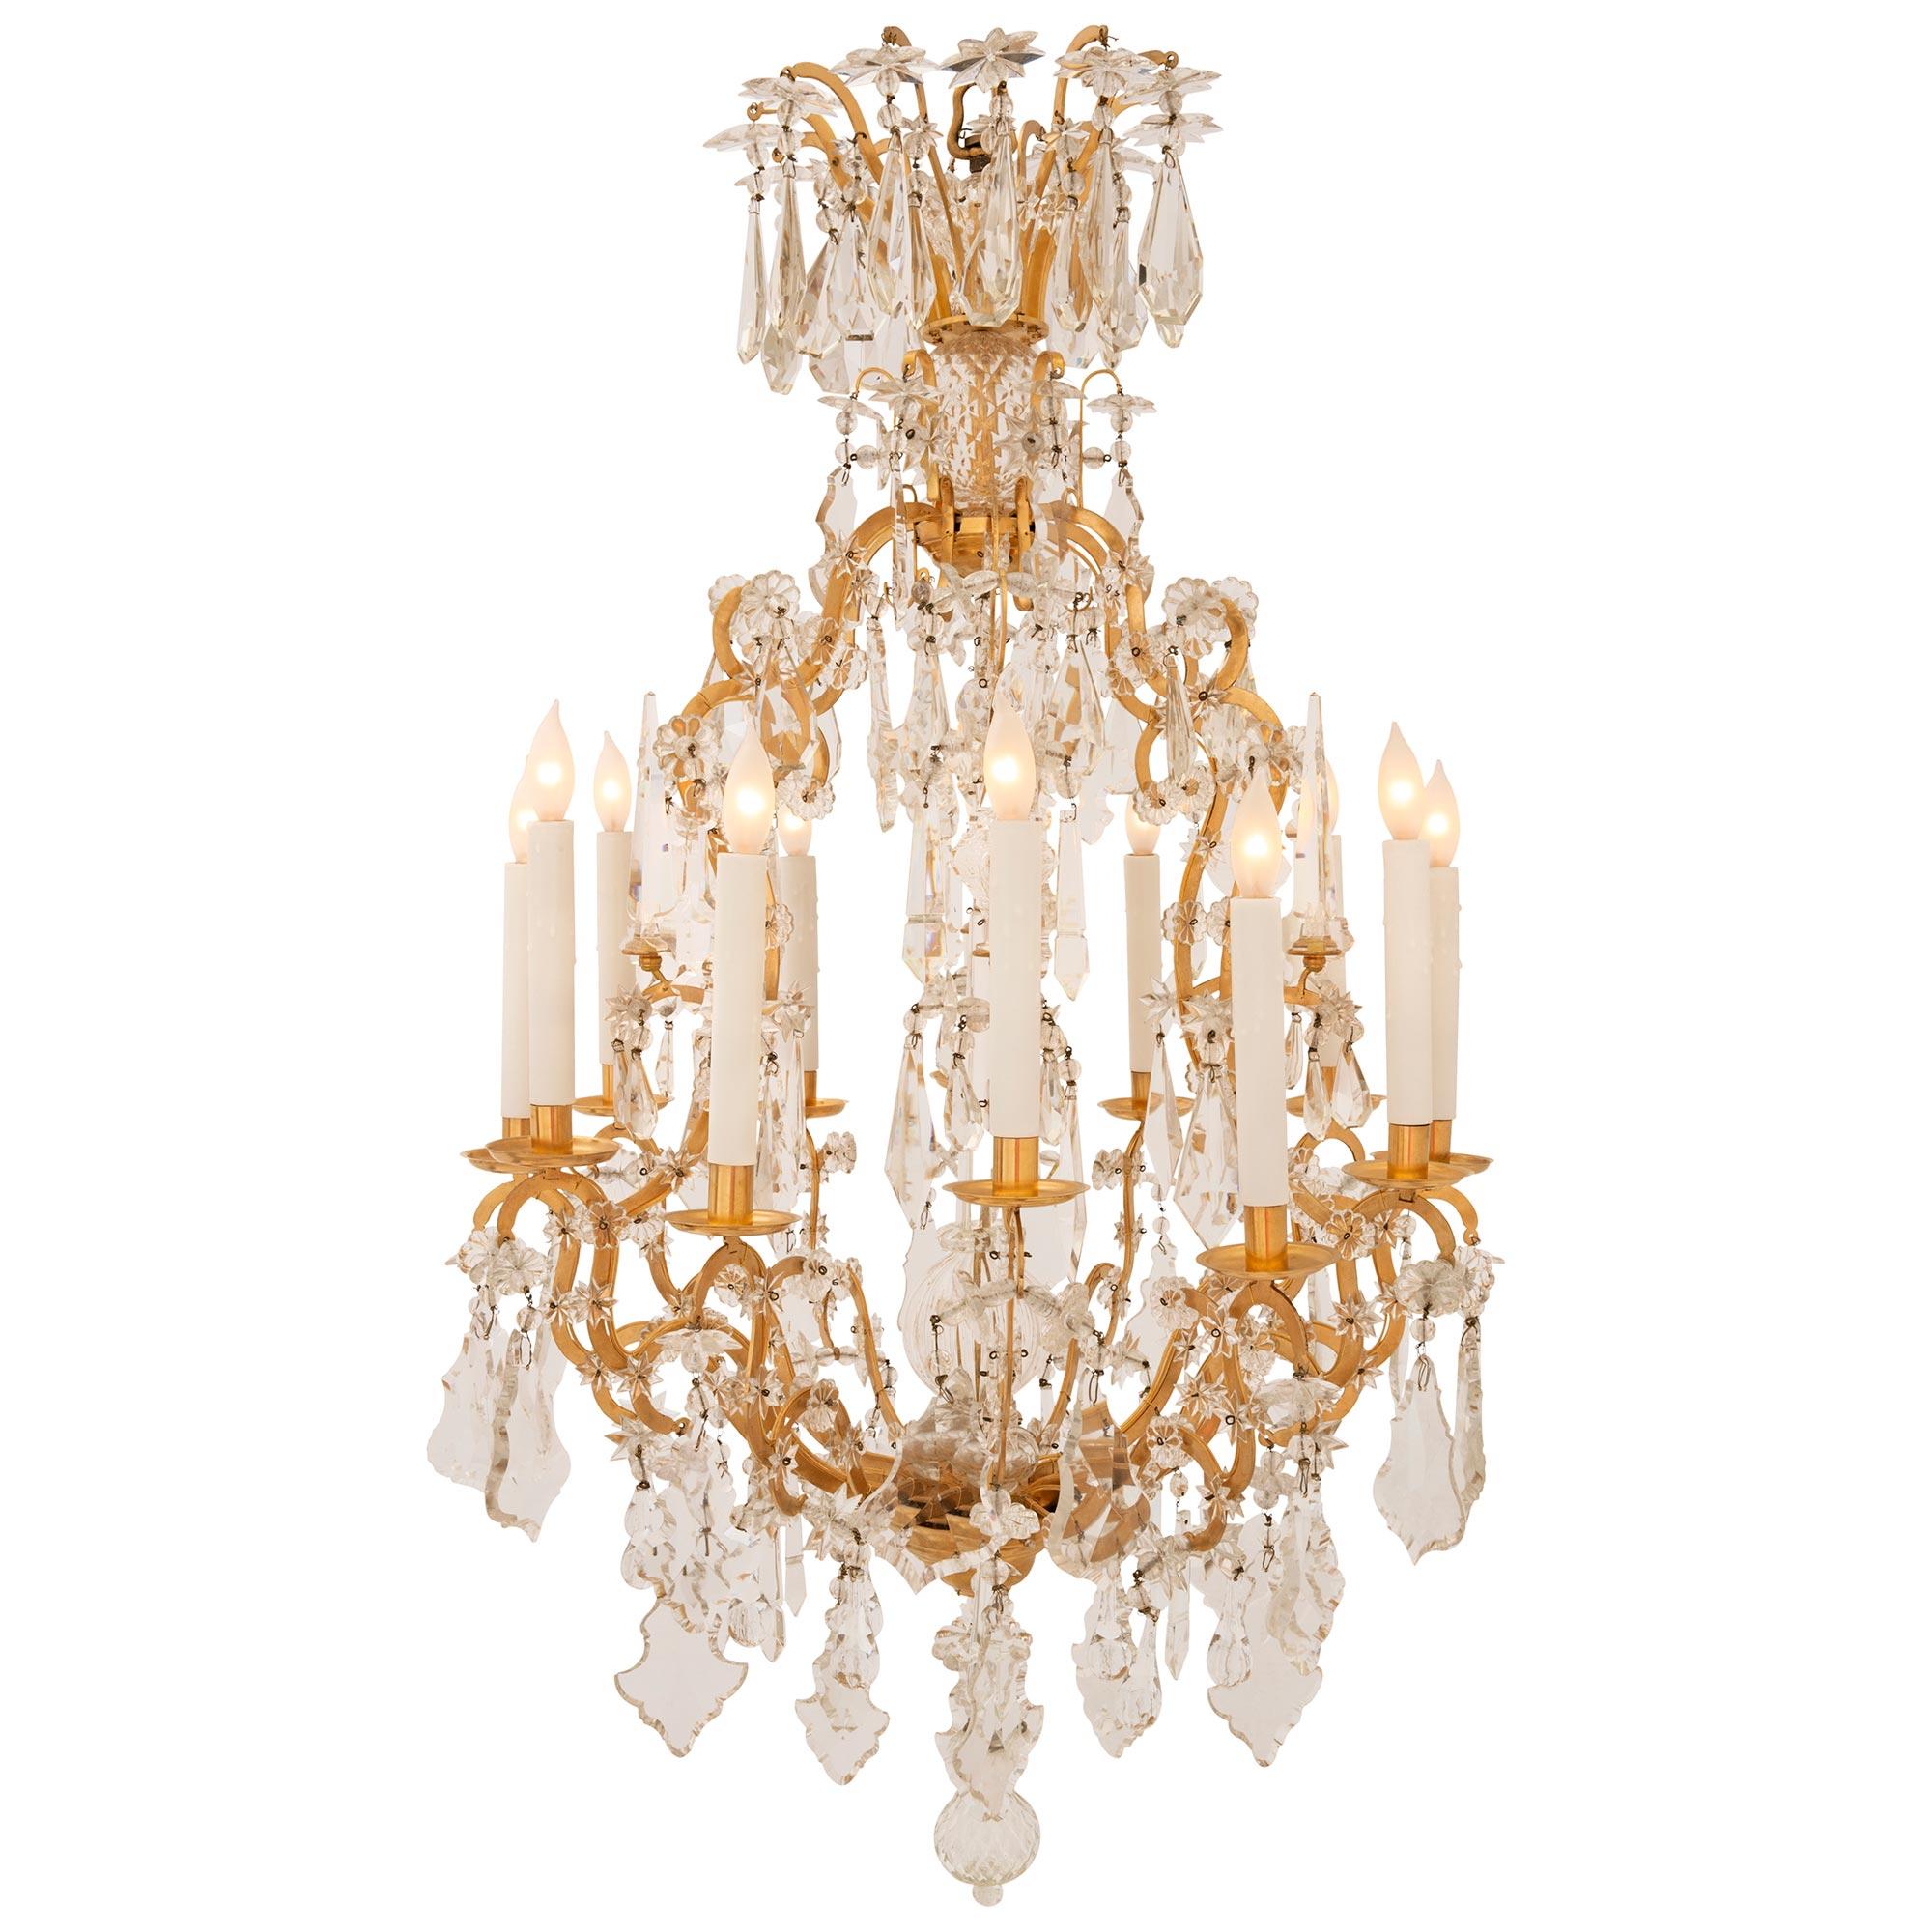 A stunning pair of French 19th century Louis XV st. ormolu and Baccarat crystal chandeliers. Each twelve arm chandelier is centered by a beautiful and most uniquely shaped hand blown crystal pendant amidst a stunning array of cut crystals and